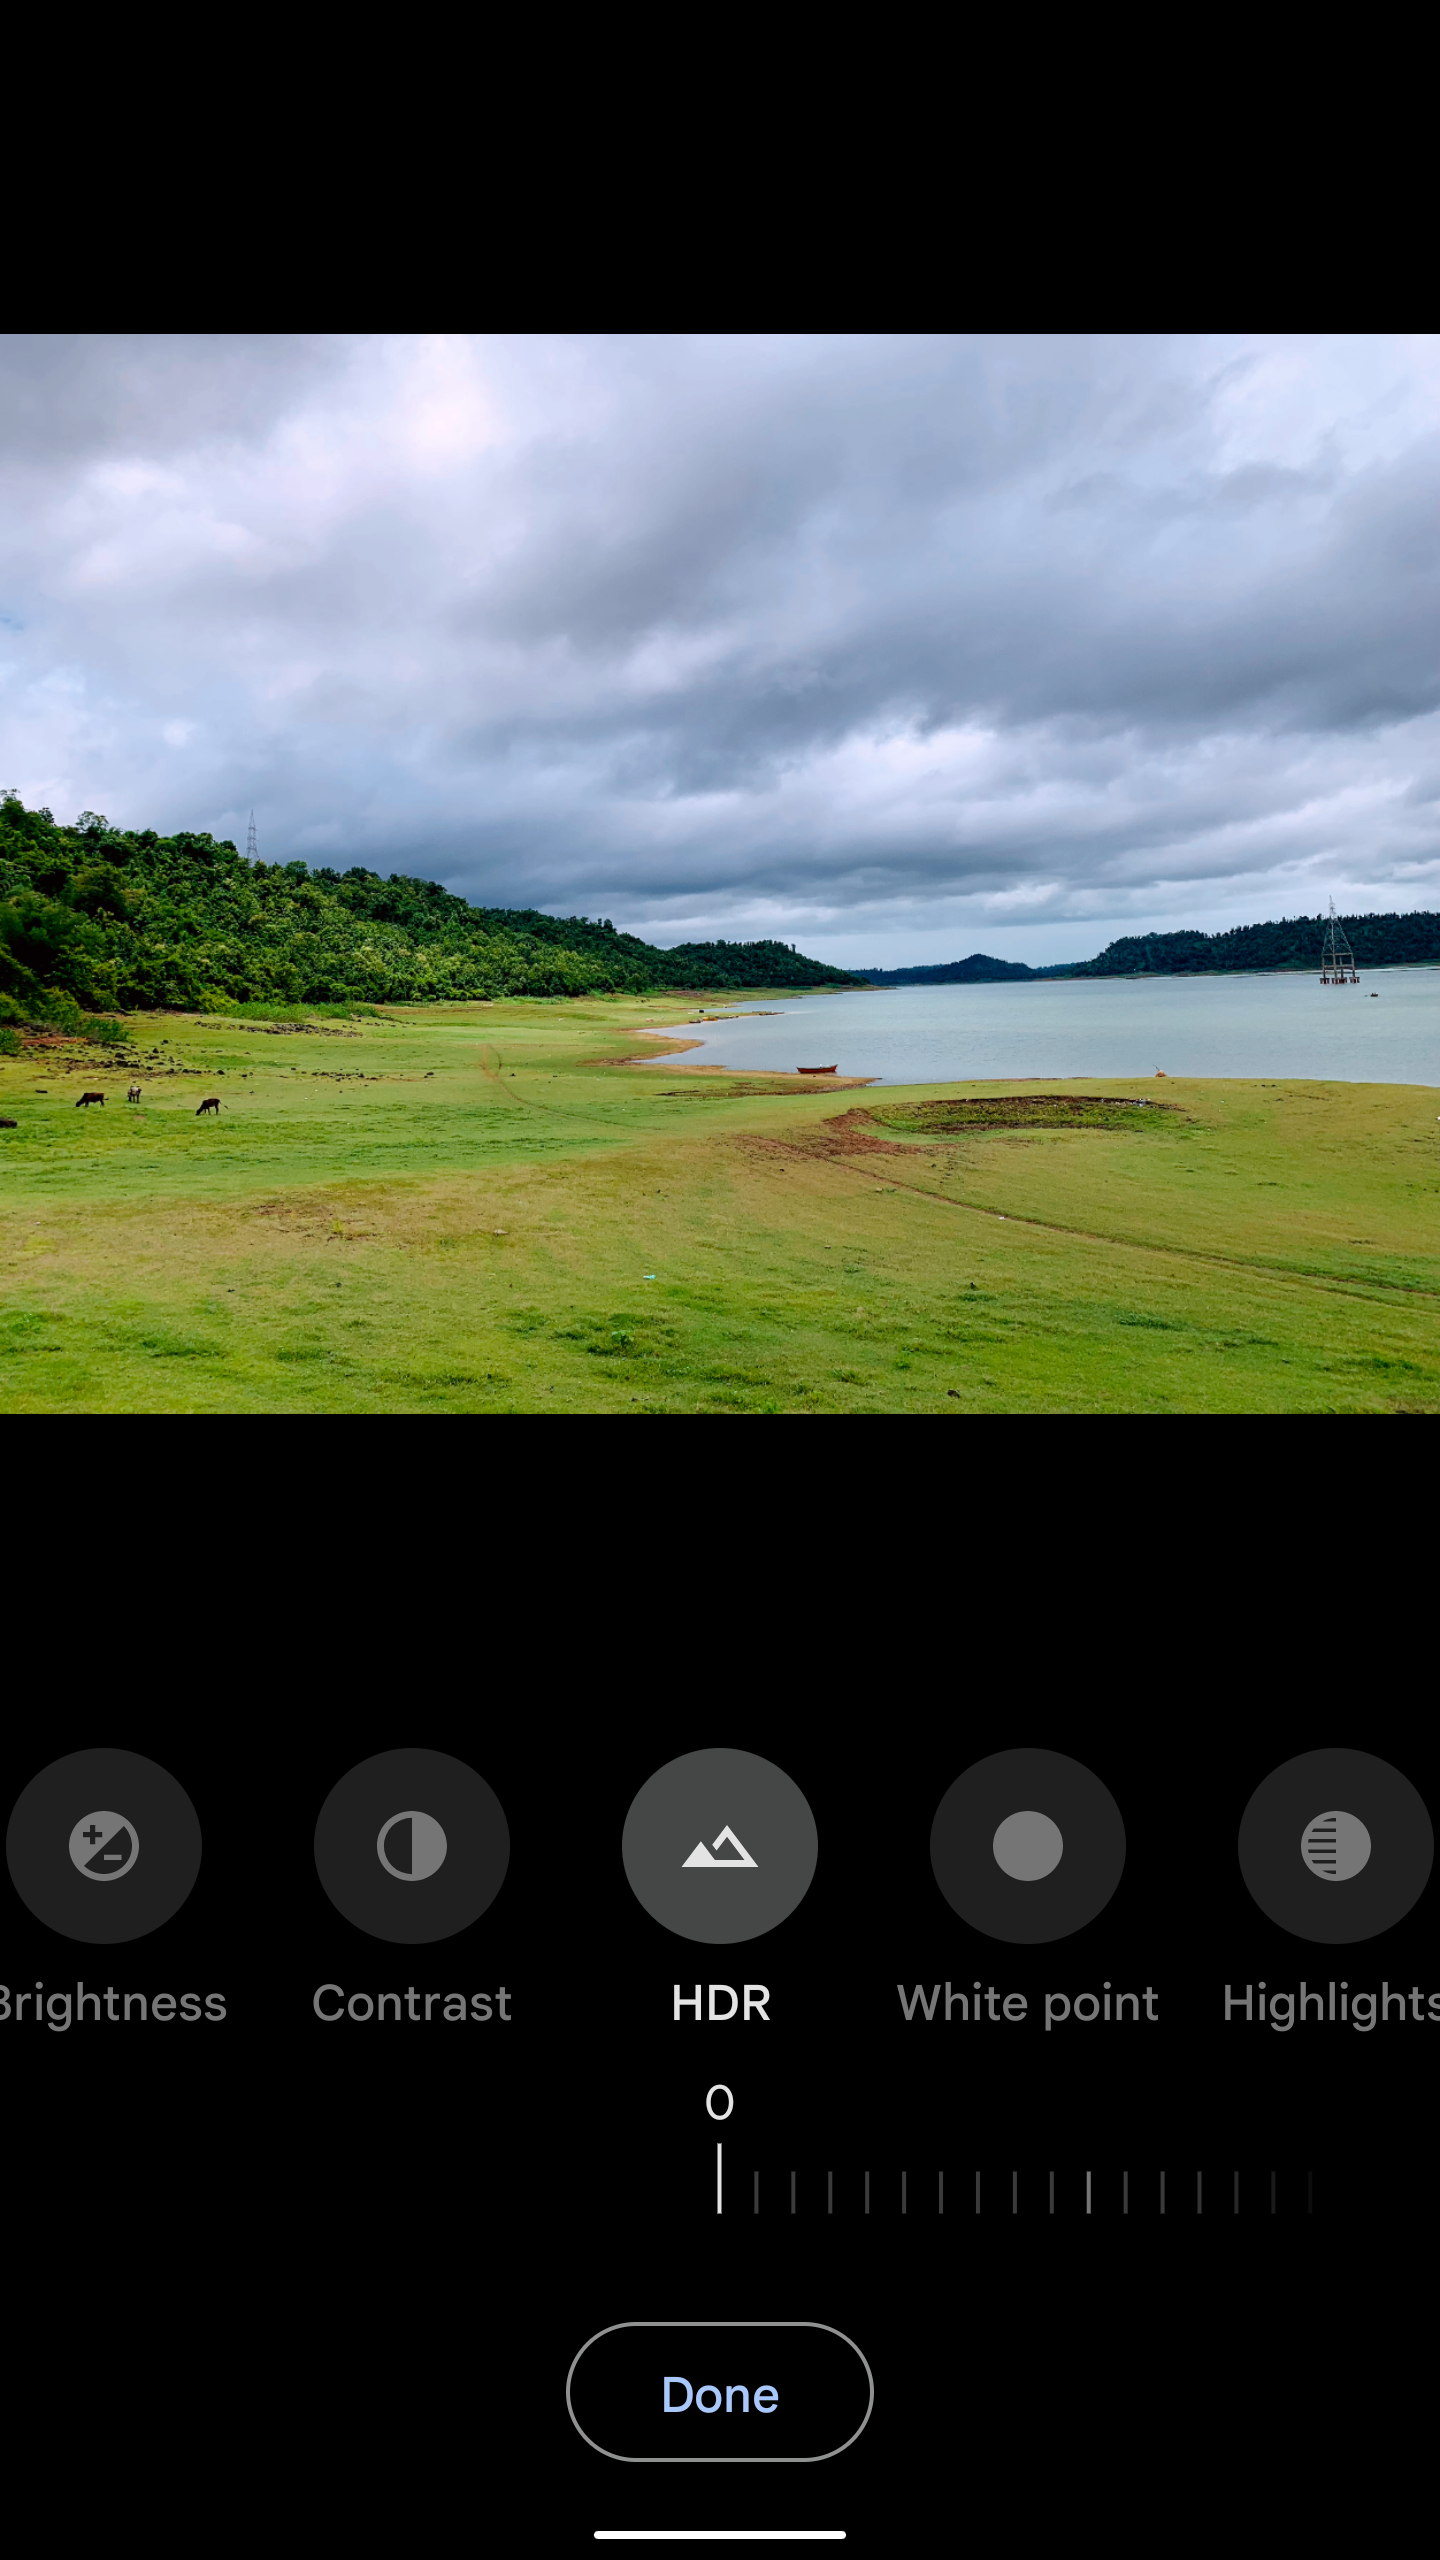 A screenshot of Google Photos showing the HDR adjustment.